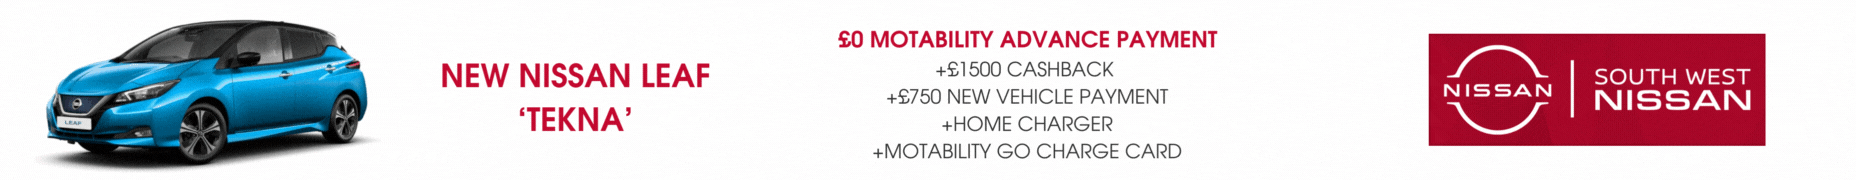 02 Q2 New - Motability Offers South West Nissan